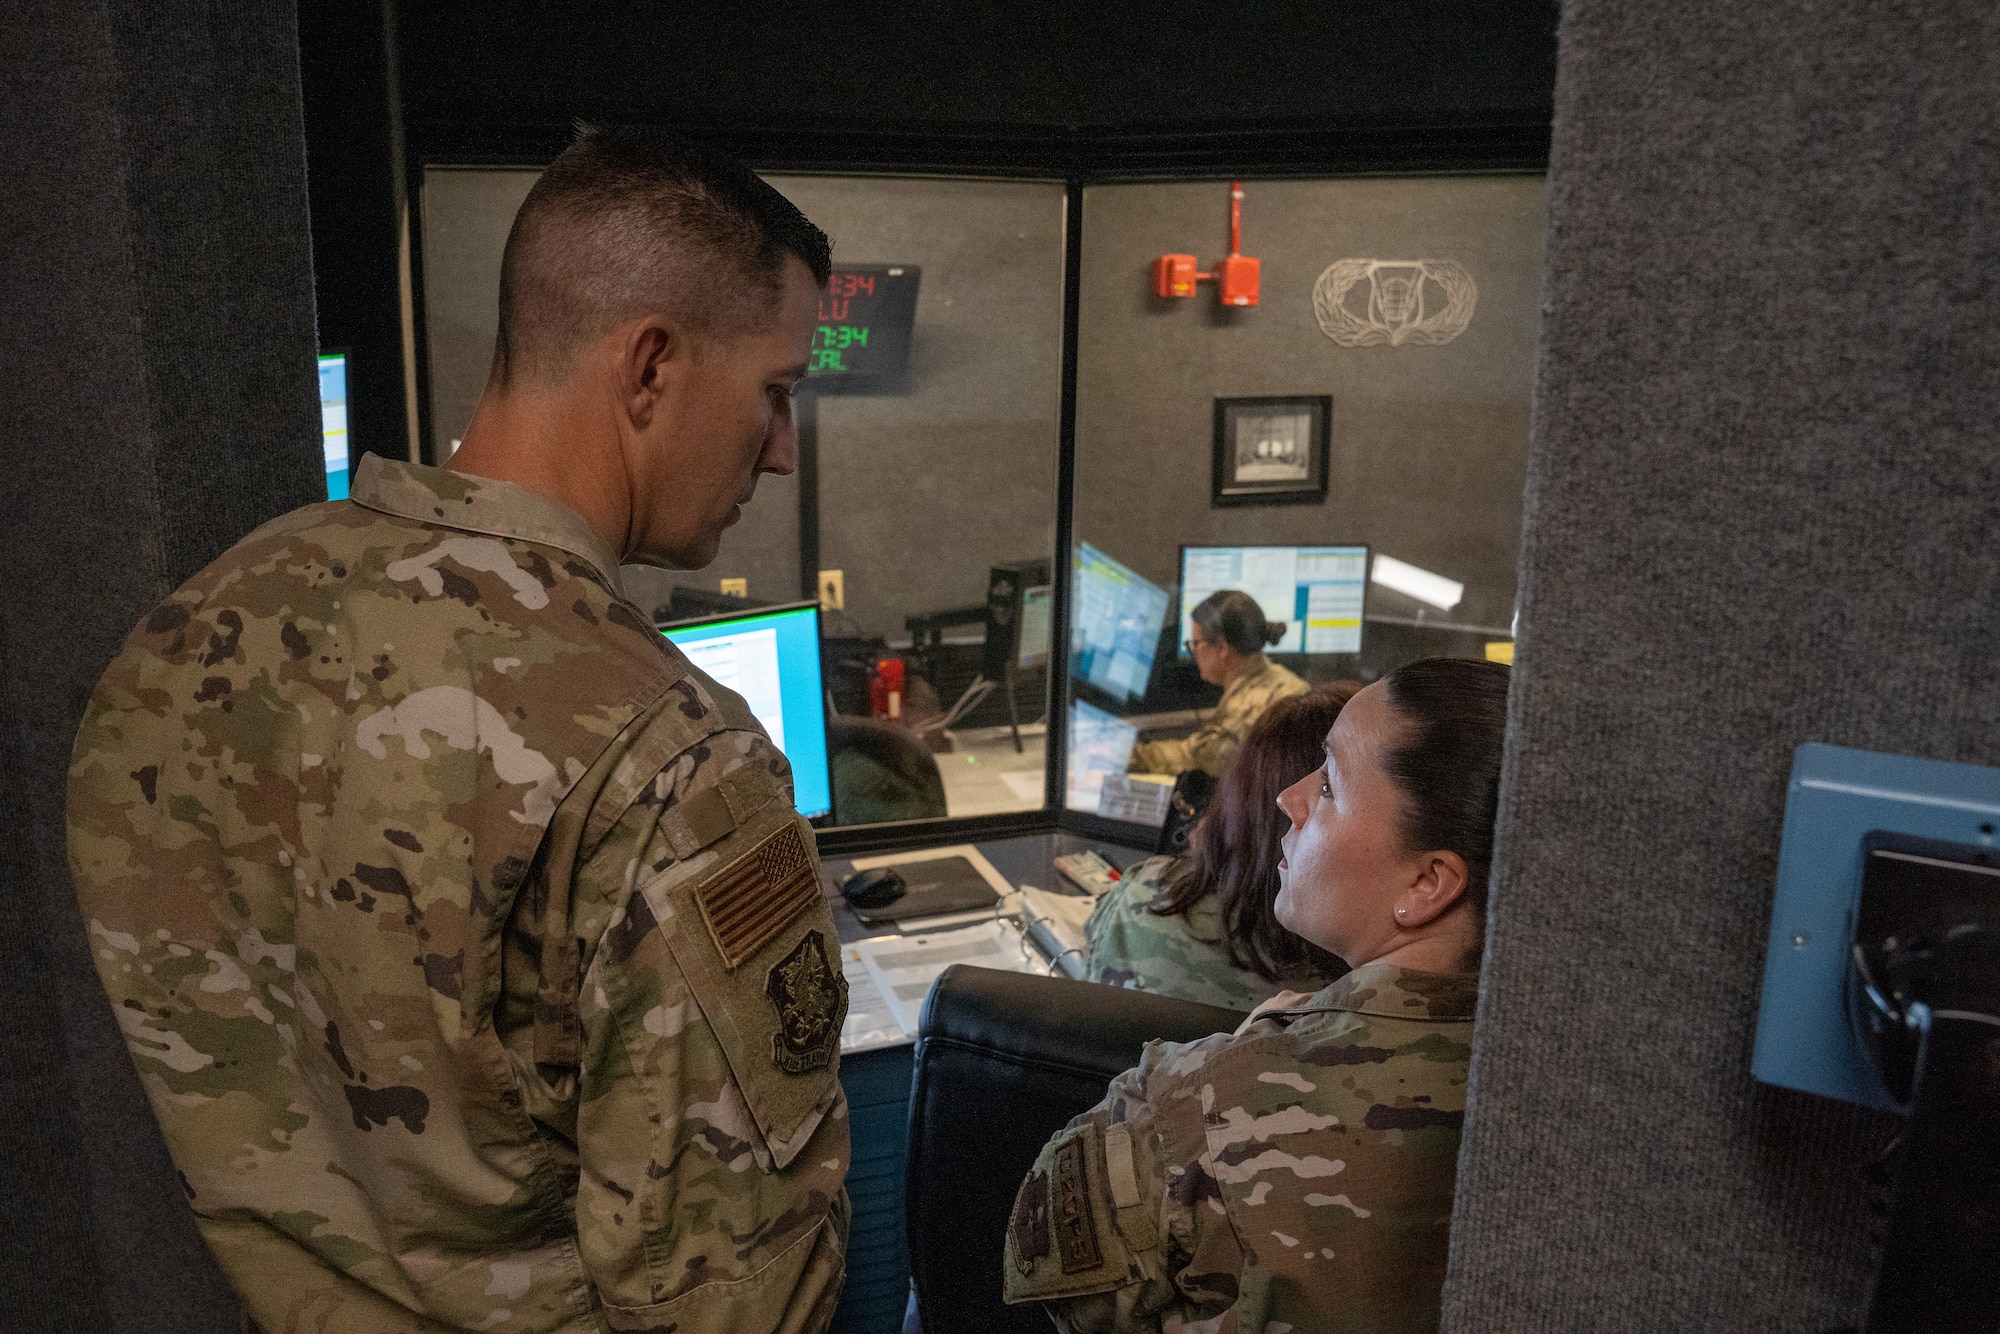 U.S. Air Force Col. Billy Pope, 81st Training Wing commander, tours the command post training area during the 81st Training Group Immersion Tour at Cody Hall on Keesler Air Force Base, Mississippi, April 4, 2023.